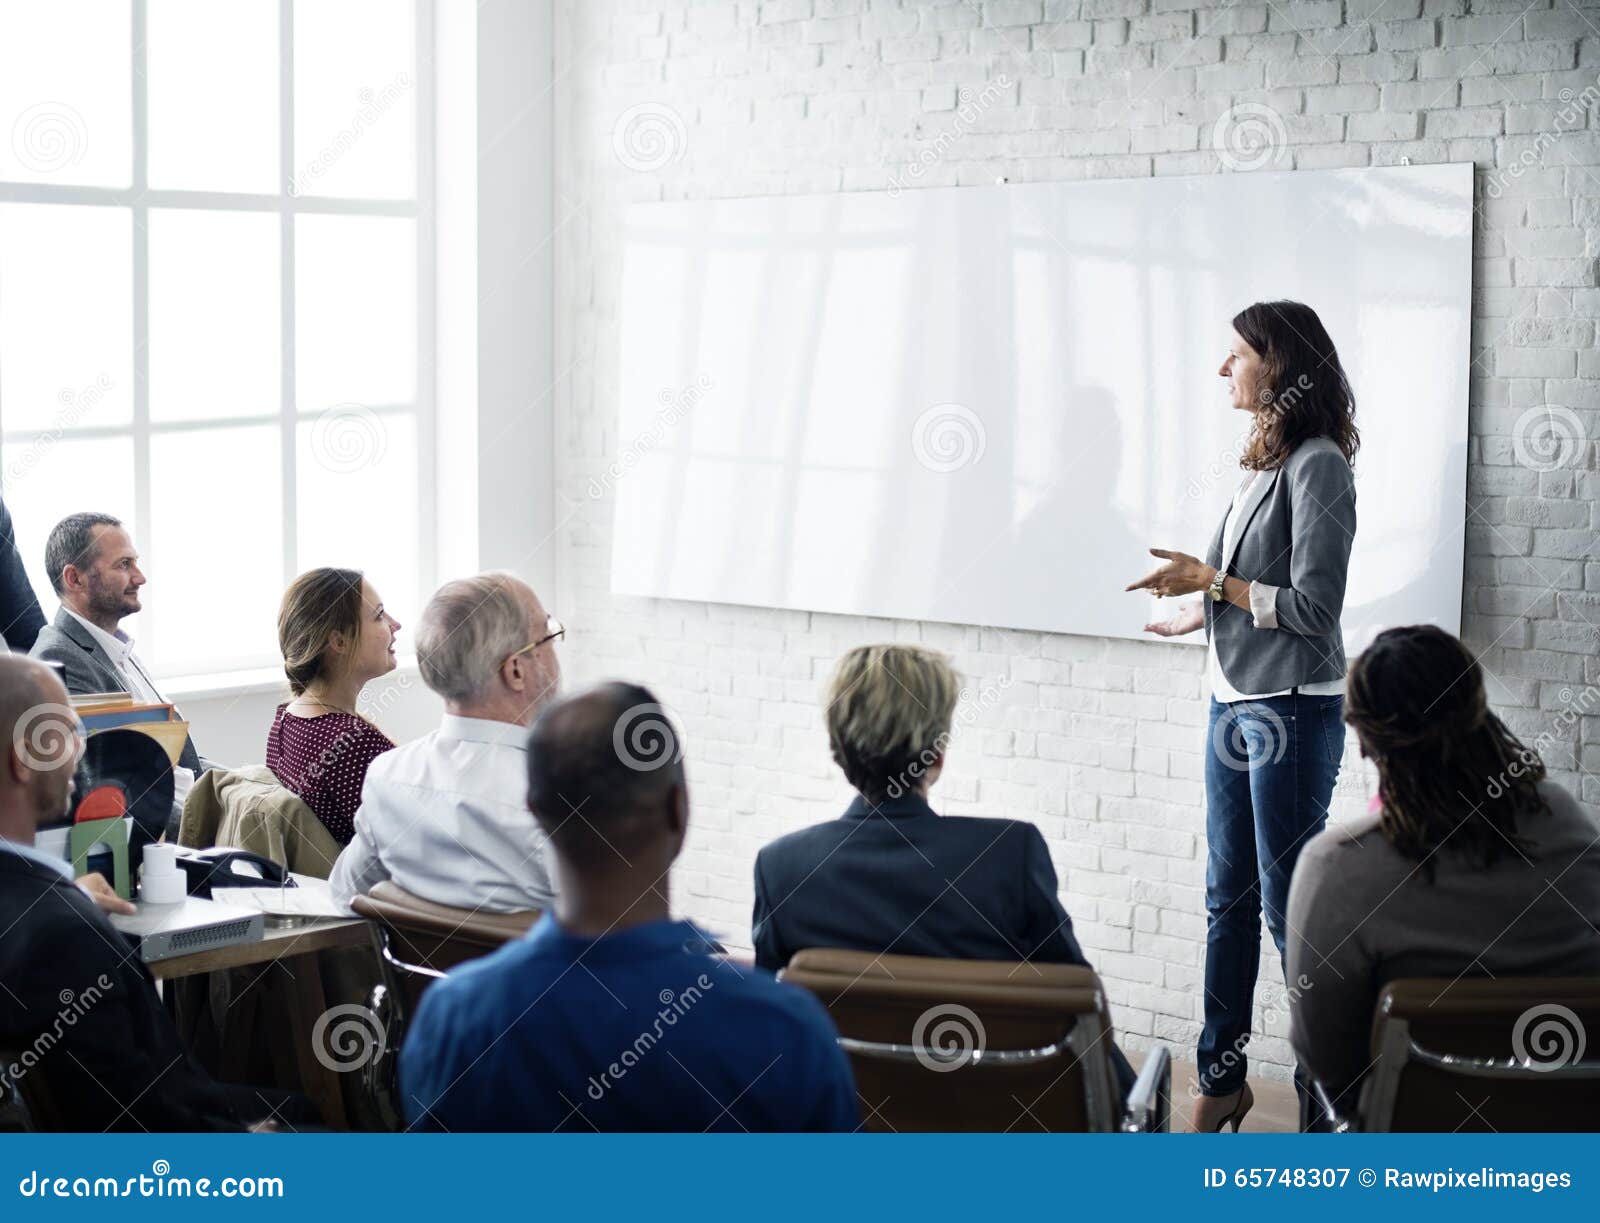 conference training planning learning coaching business concept